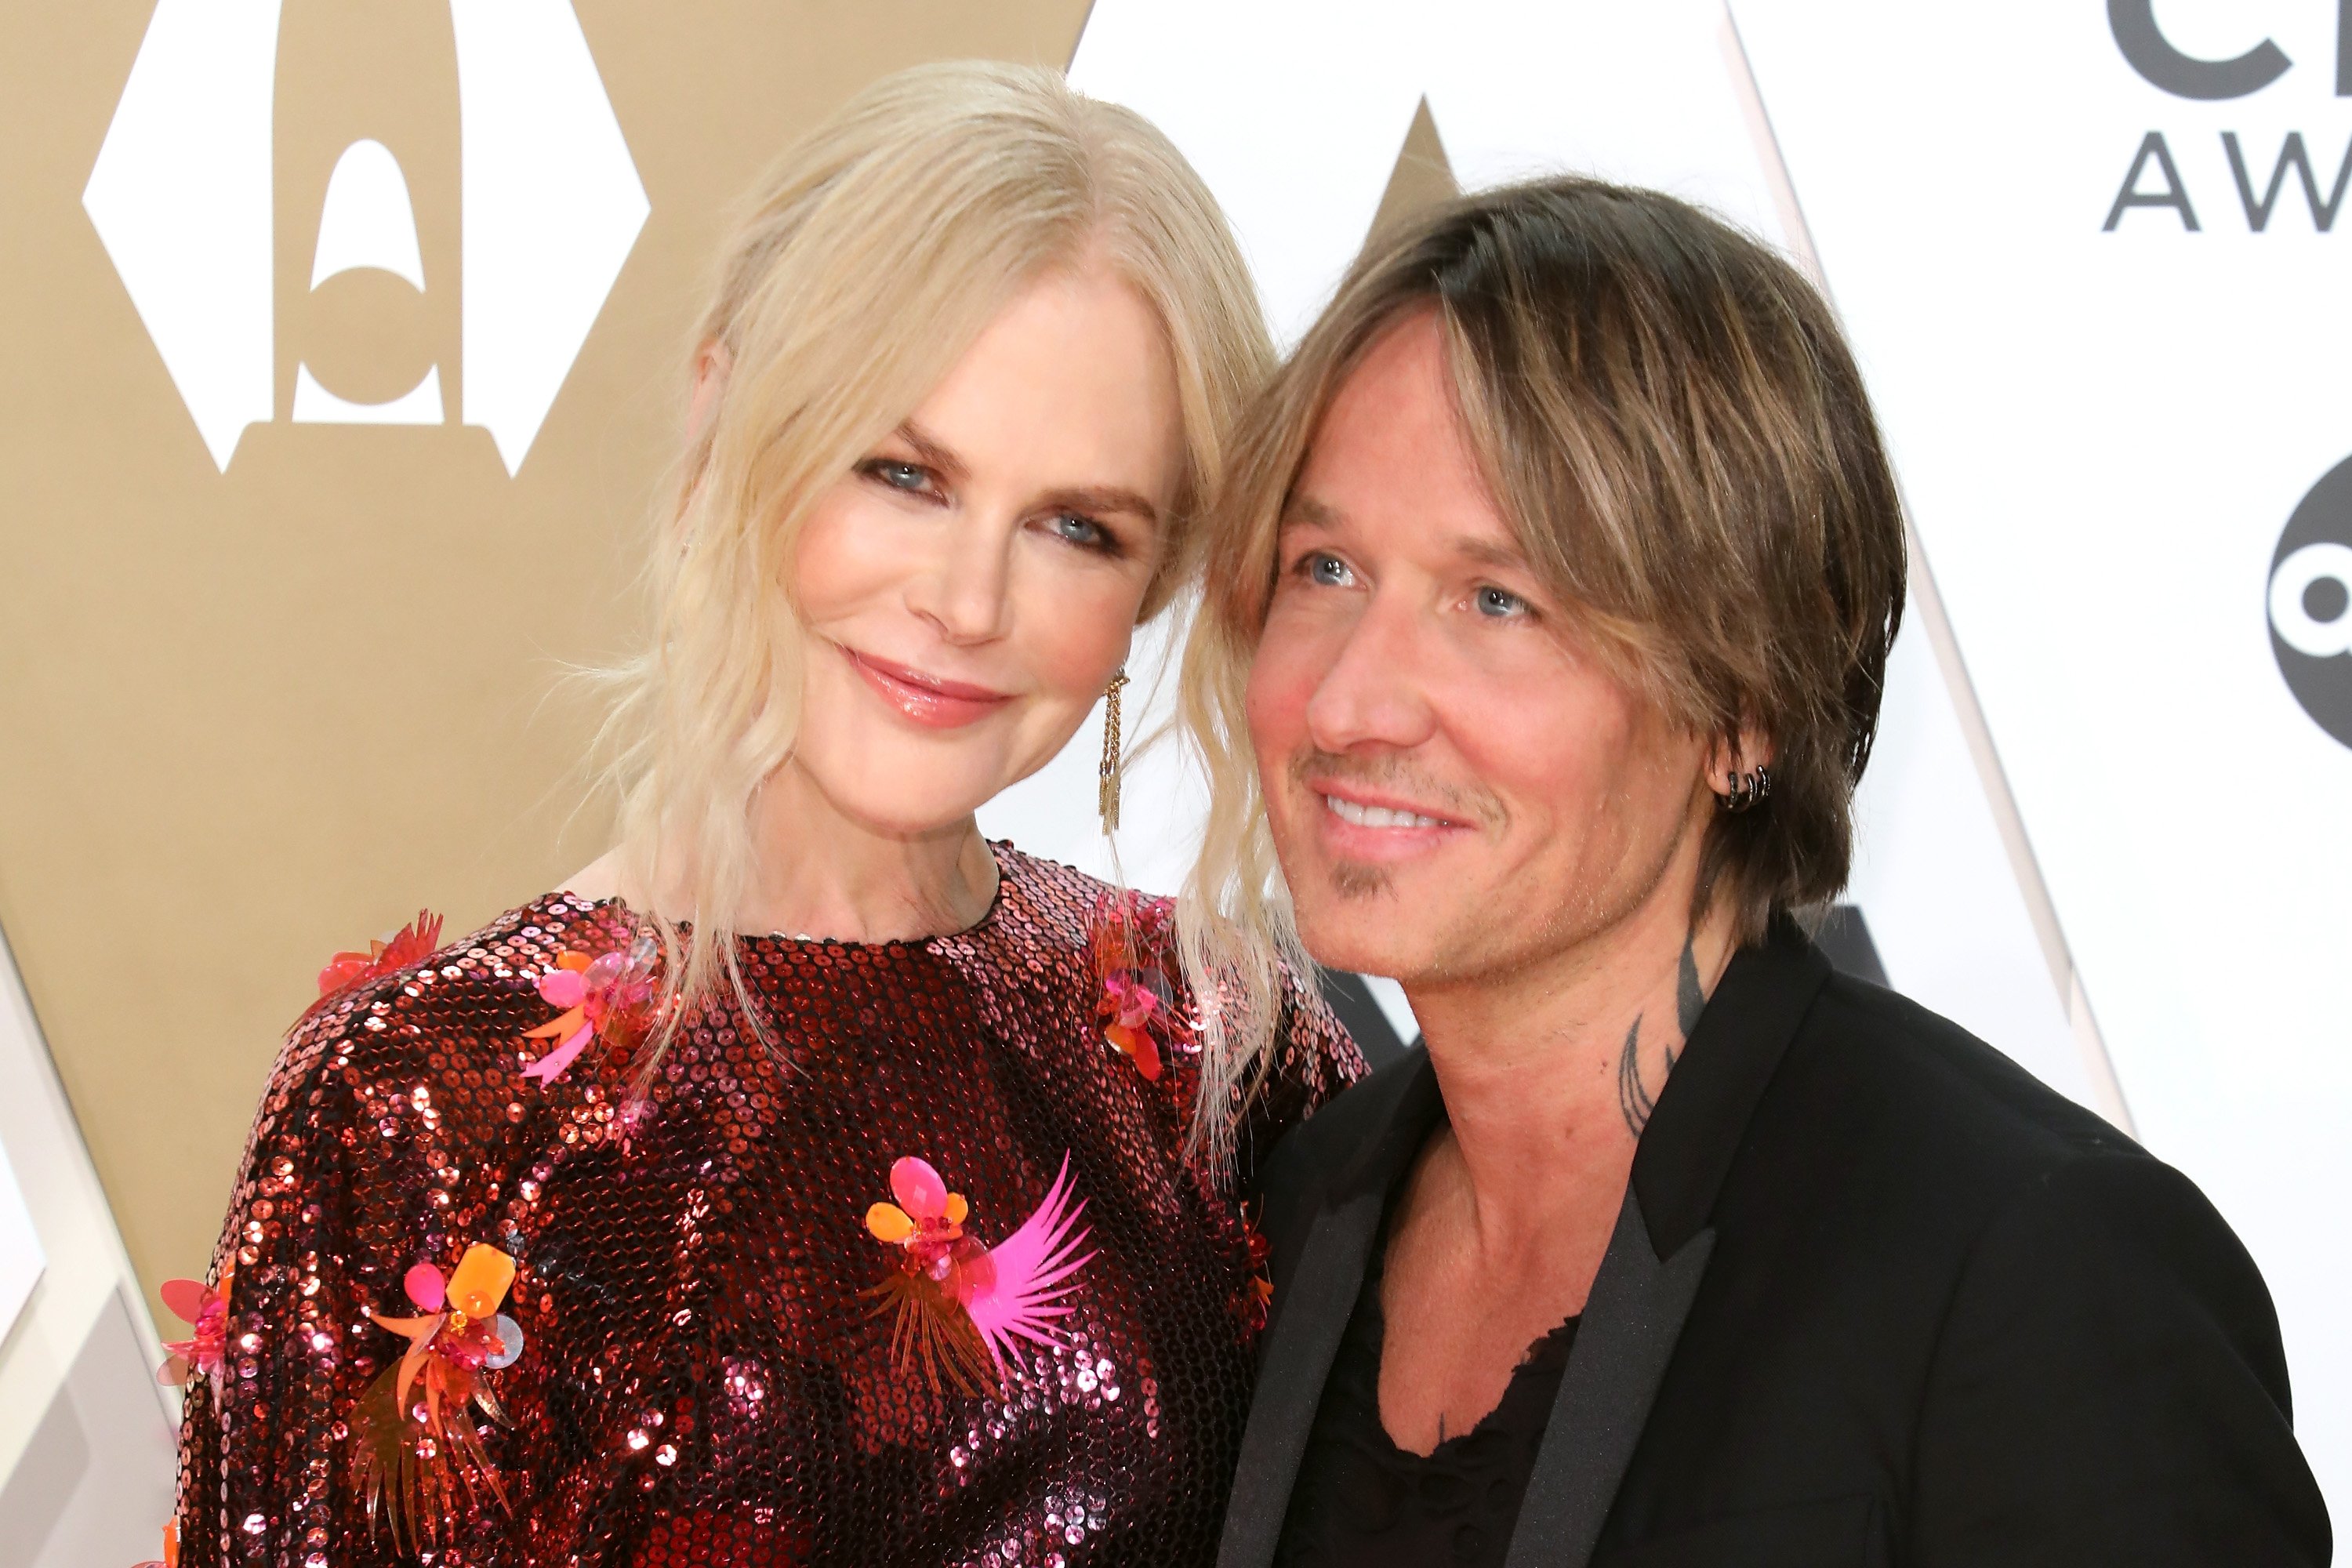 Actress Nicole Kidman and her husband musician Keith Urban during the 53nd annual CMA Awards at Bridgestone Arena on November 13, 2019 in Nashville, Tennessee. / Source: Getty Images